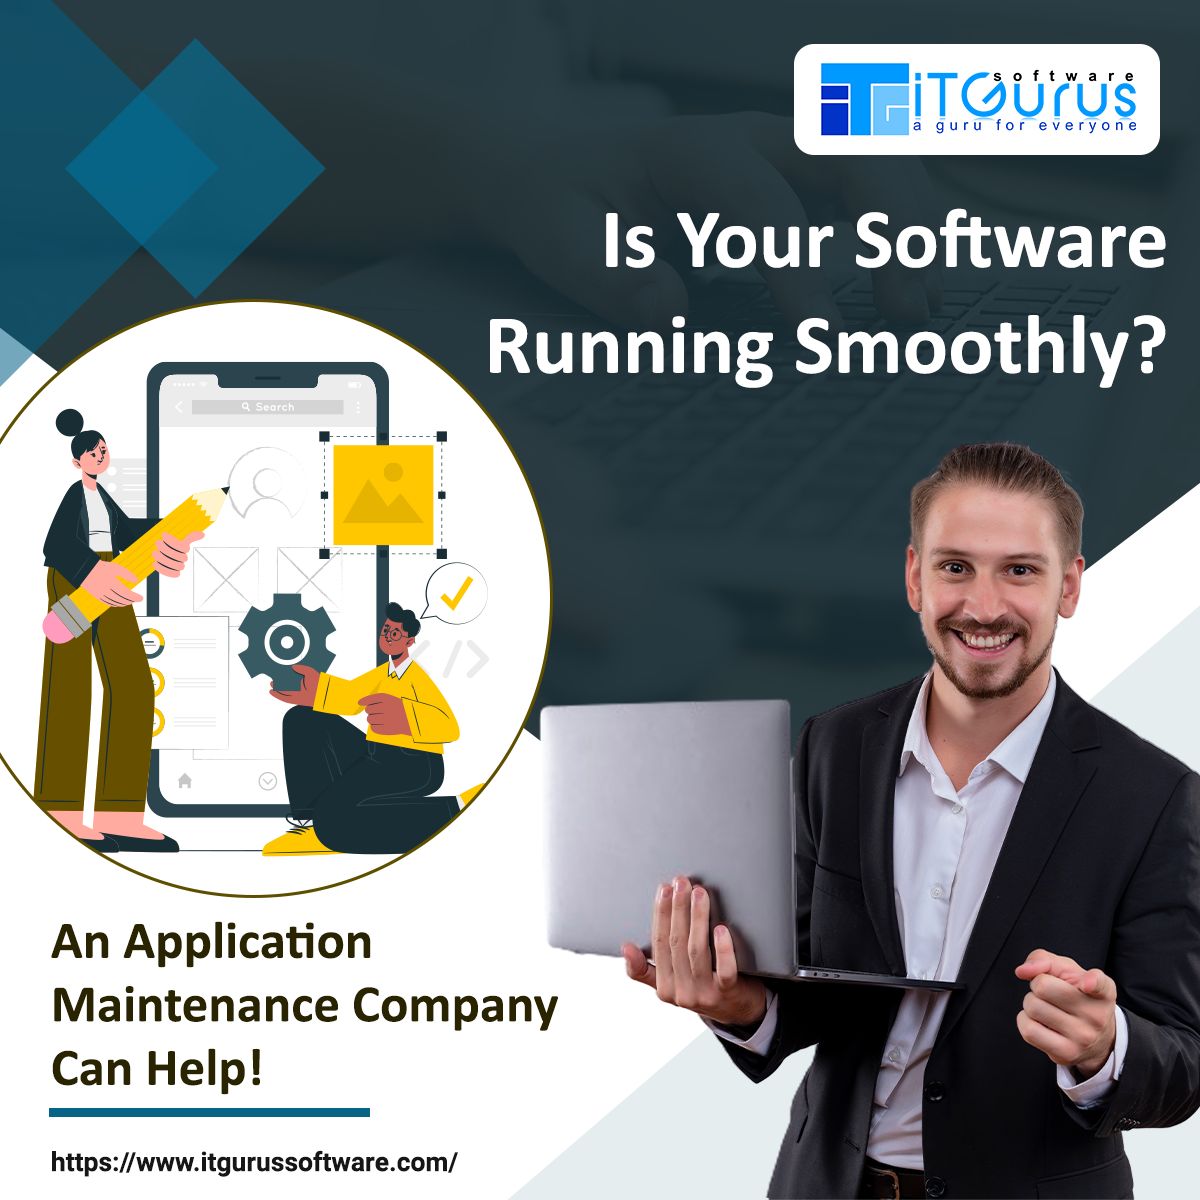 Is Your Software Running Smoothly? An Application Maintenance Company Can Help!
Read @ buff.ly/3UDUxjJ

#innovation #iTGurusSoftware #Secure #safe #security #Applicationmaintenancecompany  #mobileapp #ios #Testing #IT #iot #iosapps #androidapps #mobileapplication